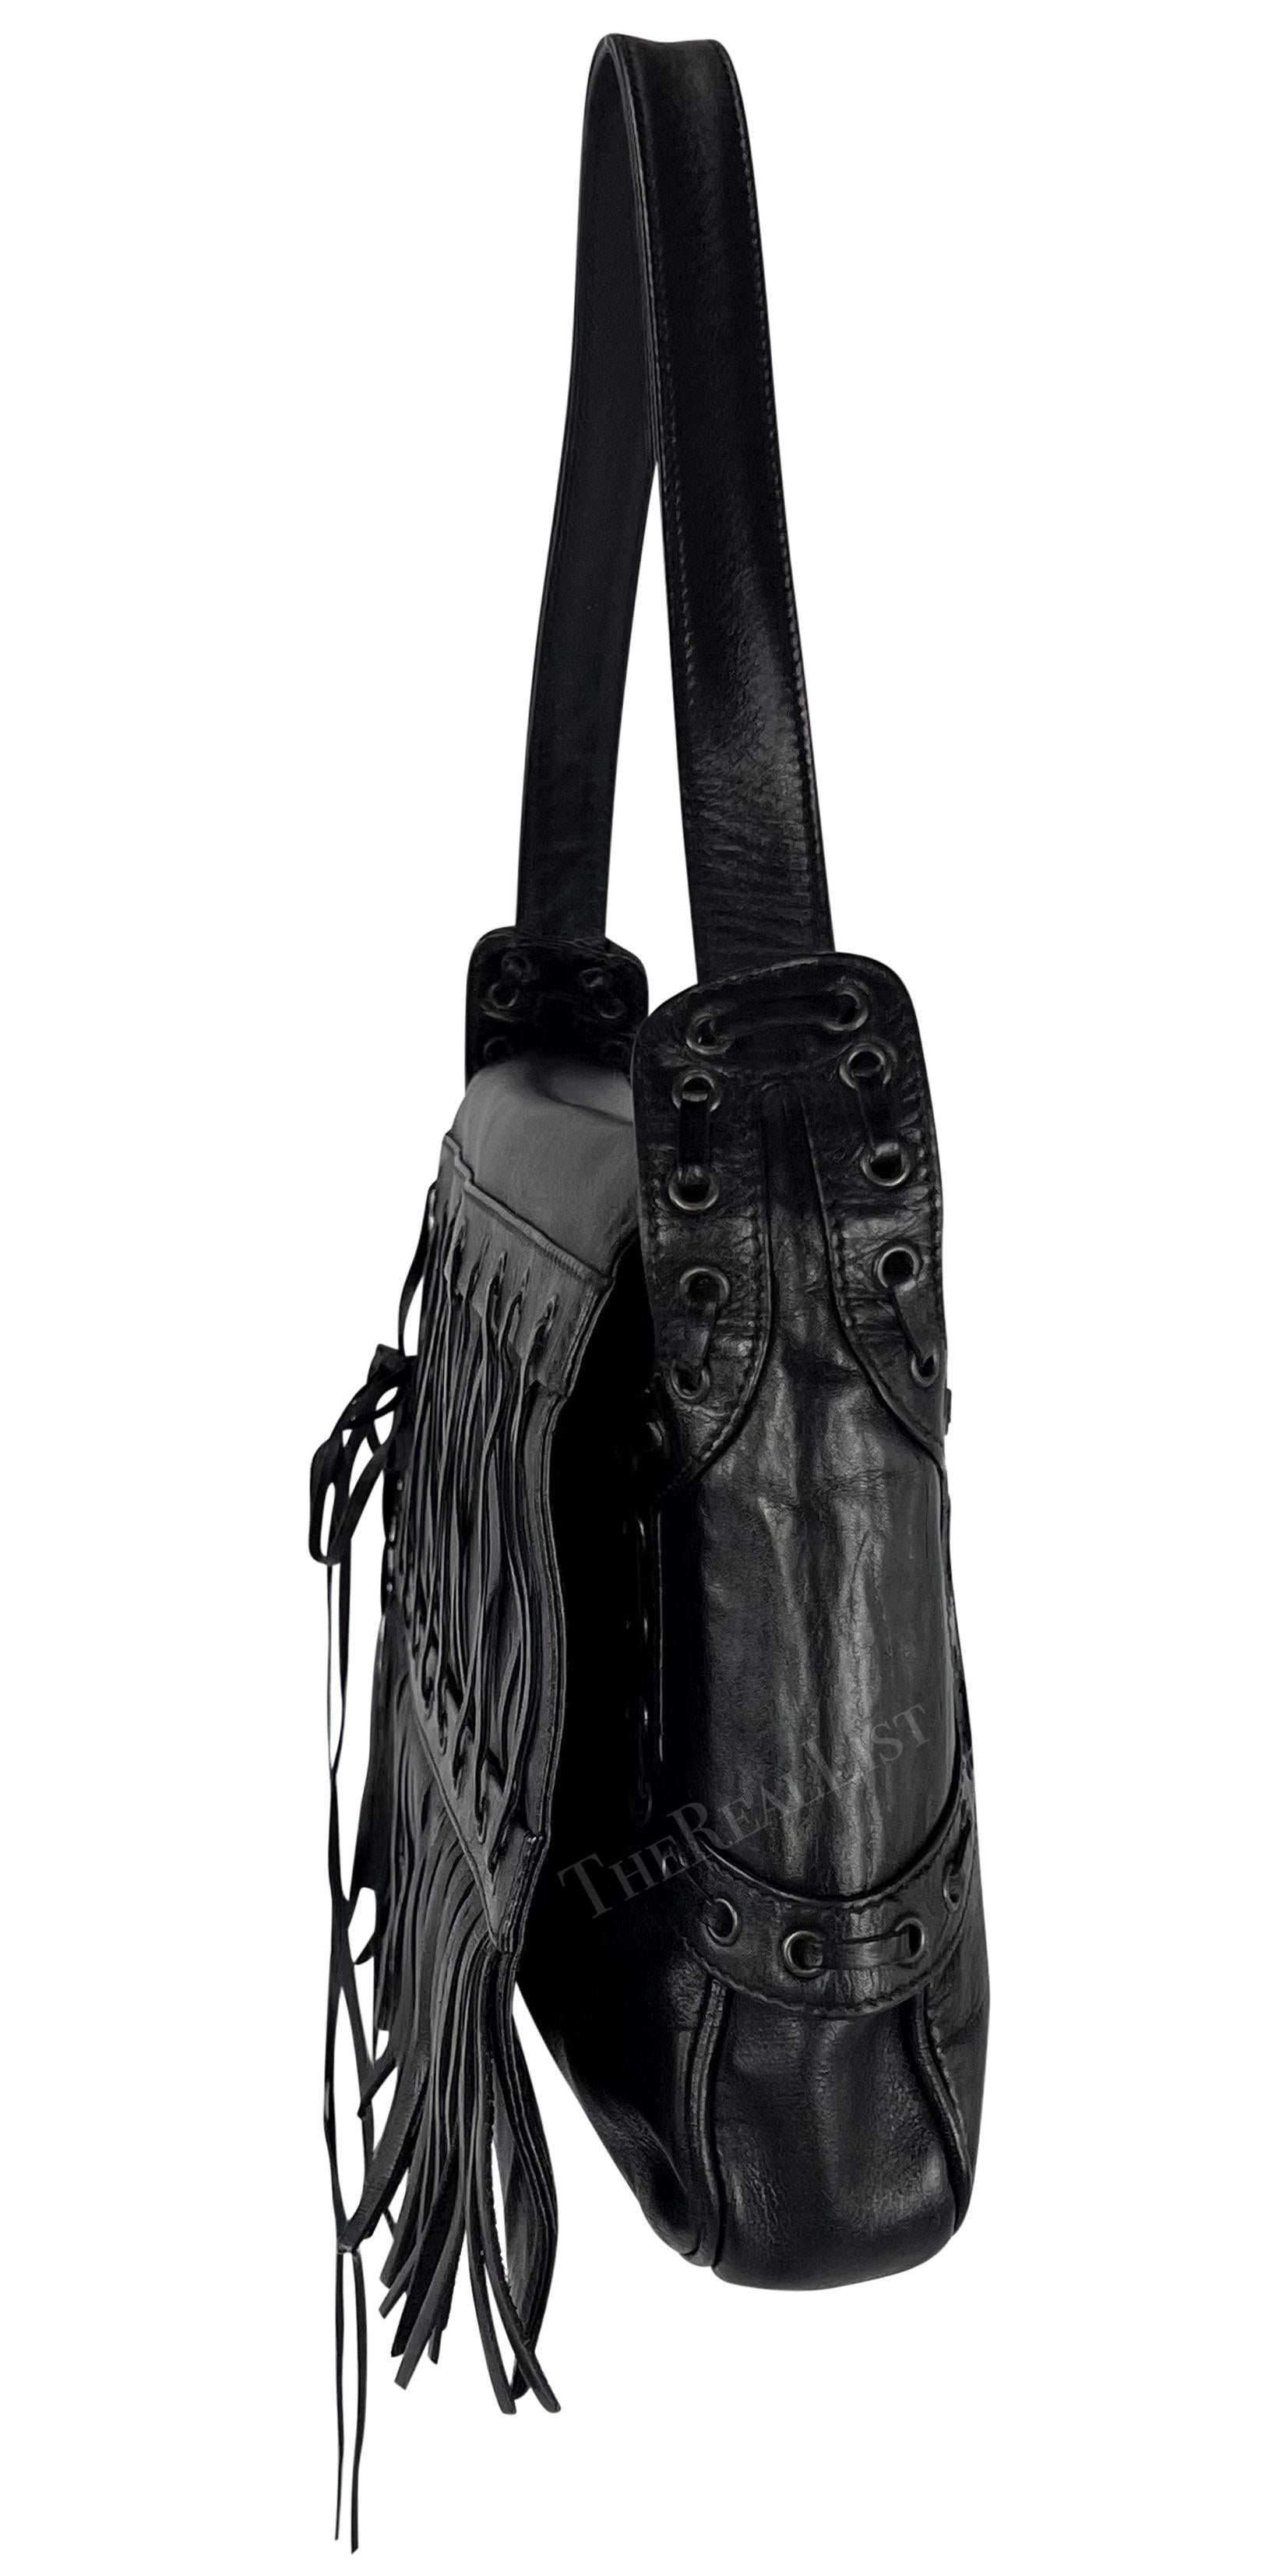 S/S 2002 Gianni Versace by Donatella Black Leather Lace Up Fringe Shoulder Bag In Good Condition For Sale In West Hollywood, CA